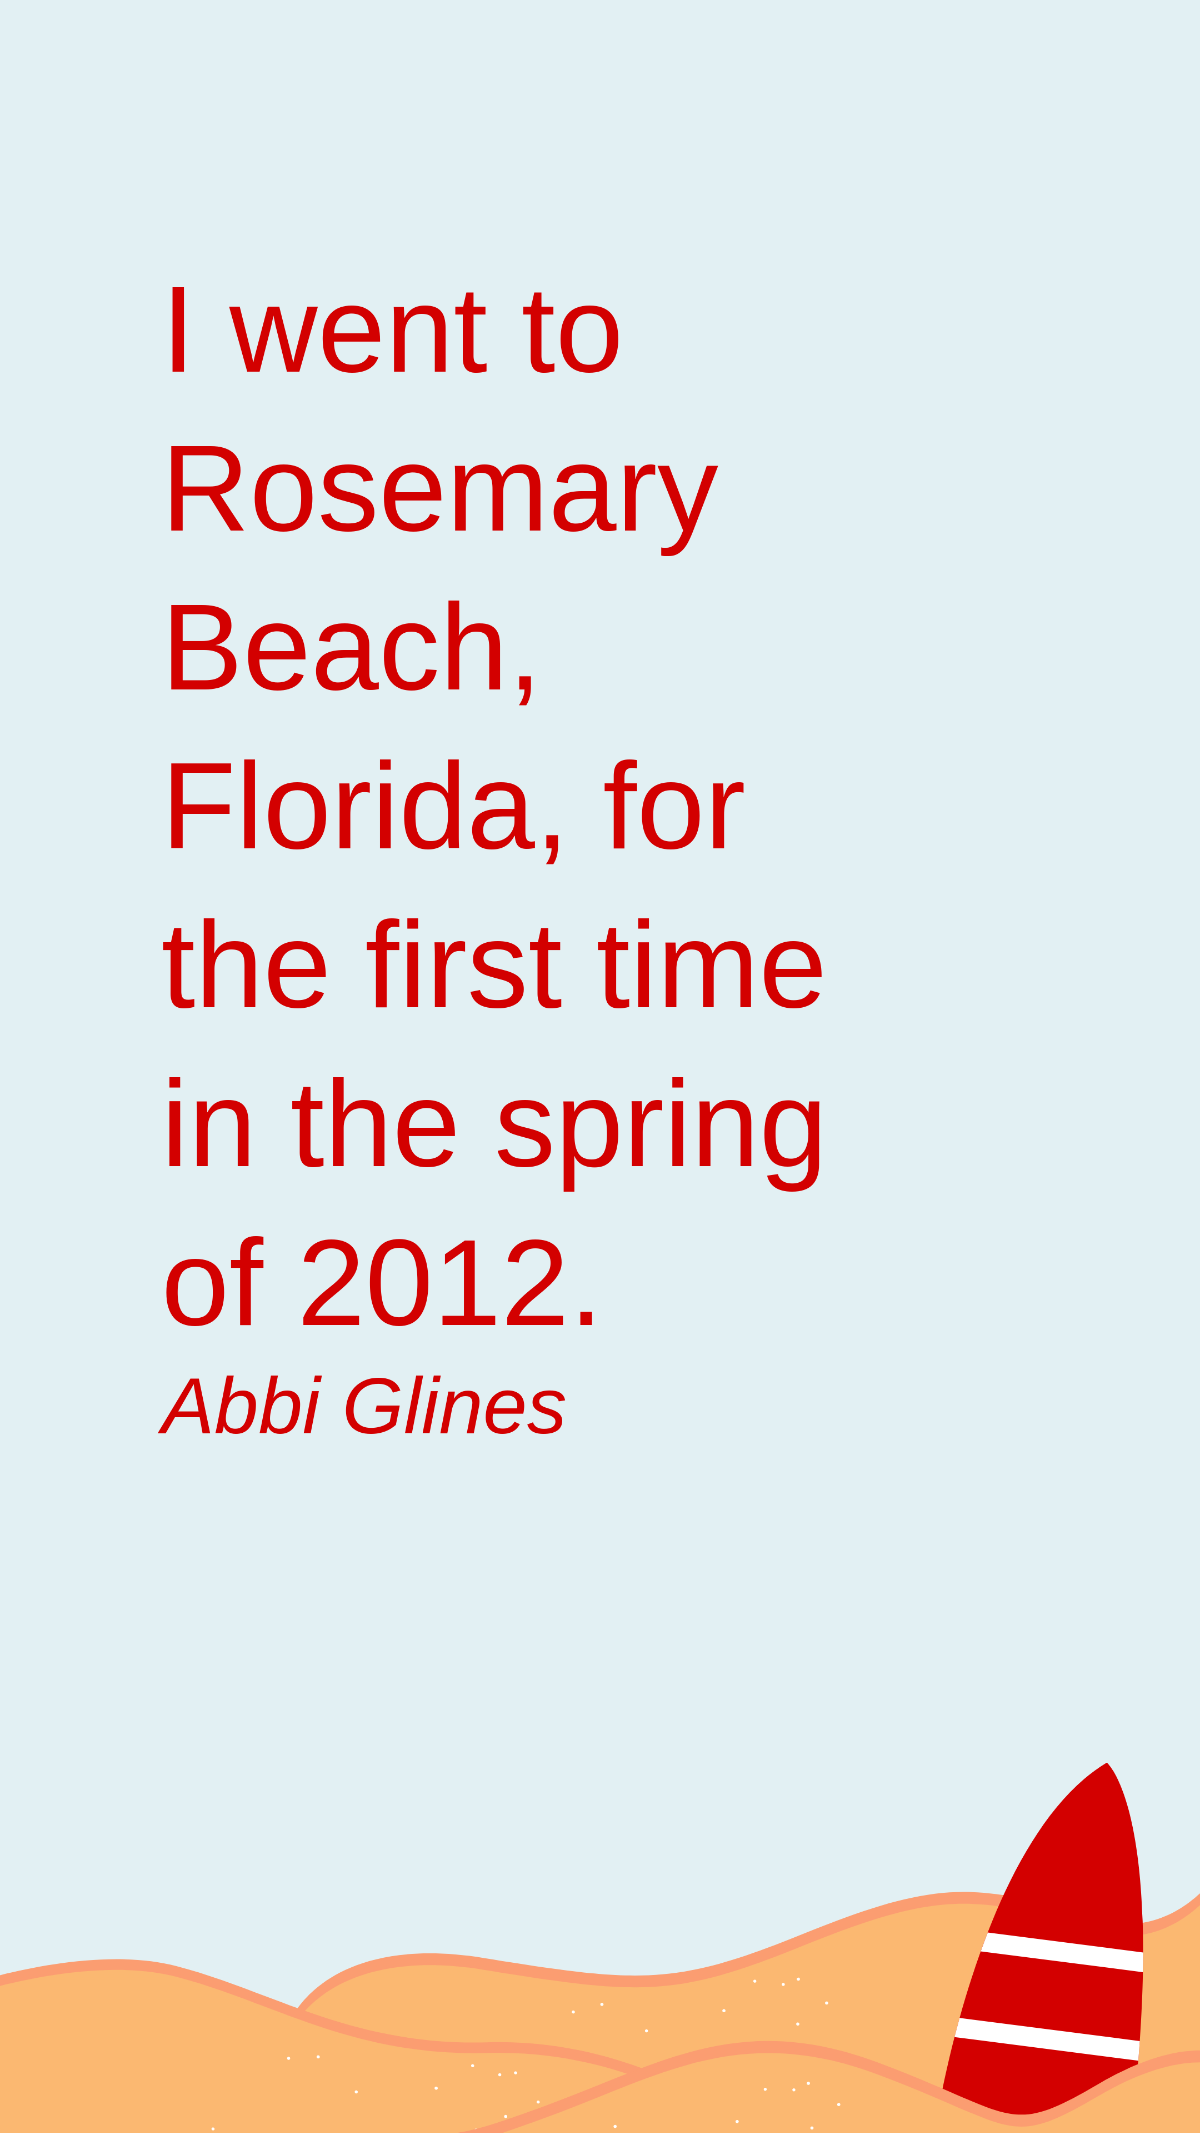 Abbi Glines - I went to Rosemary Beach, Florida, for the first time in the spring of 2012.